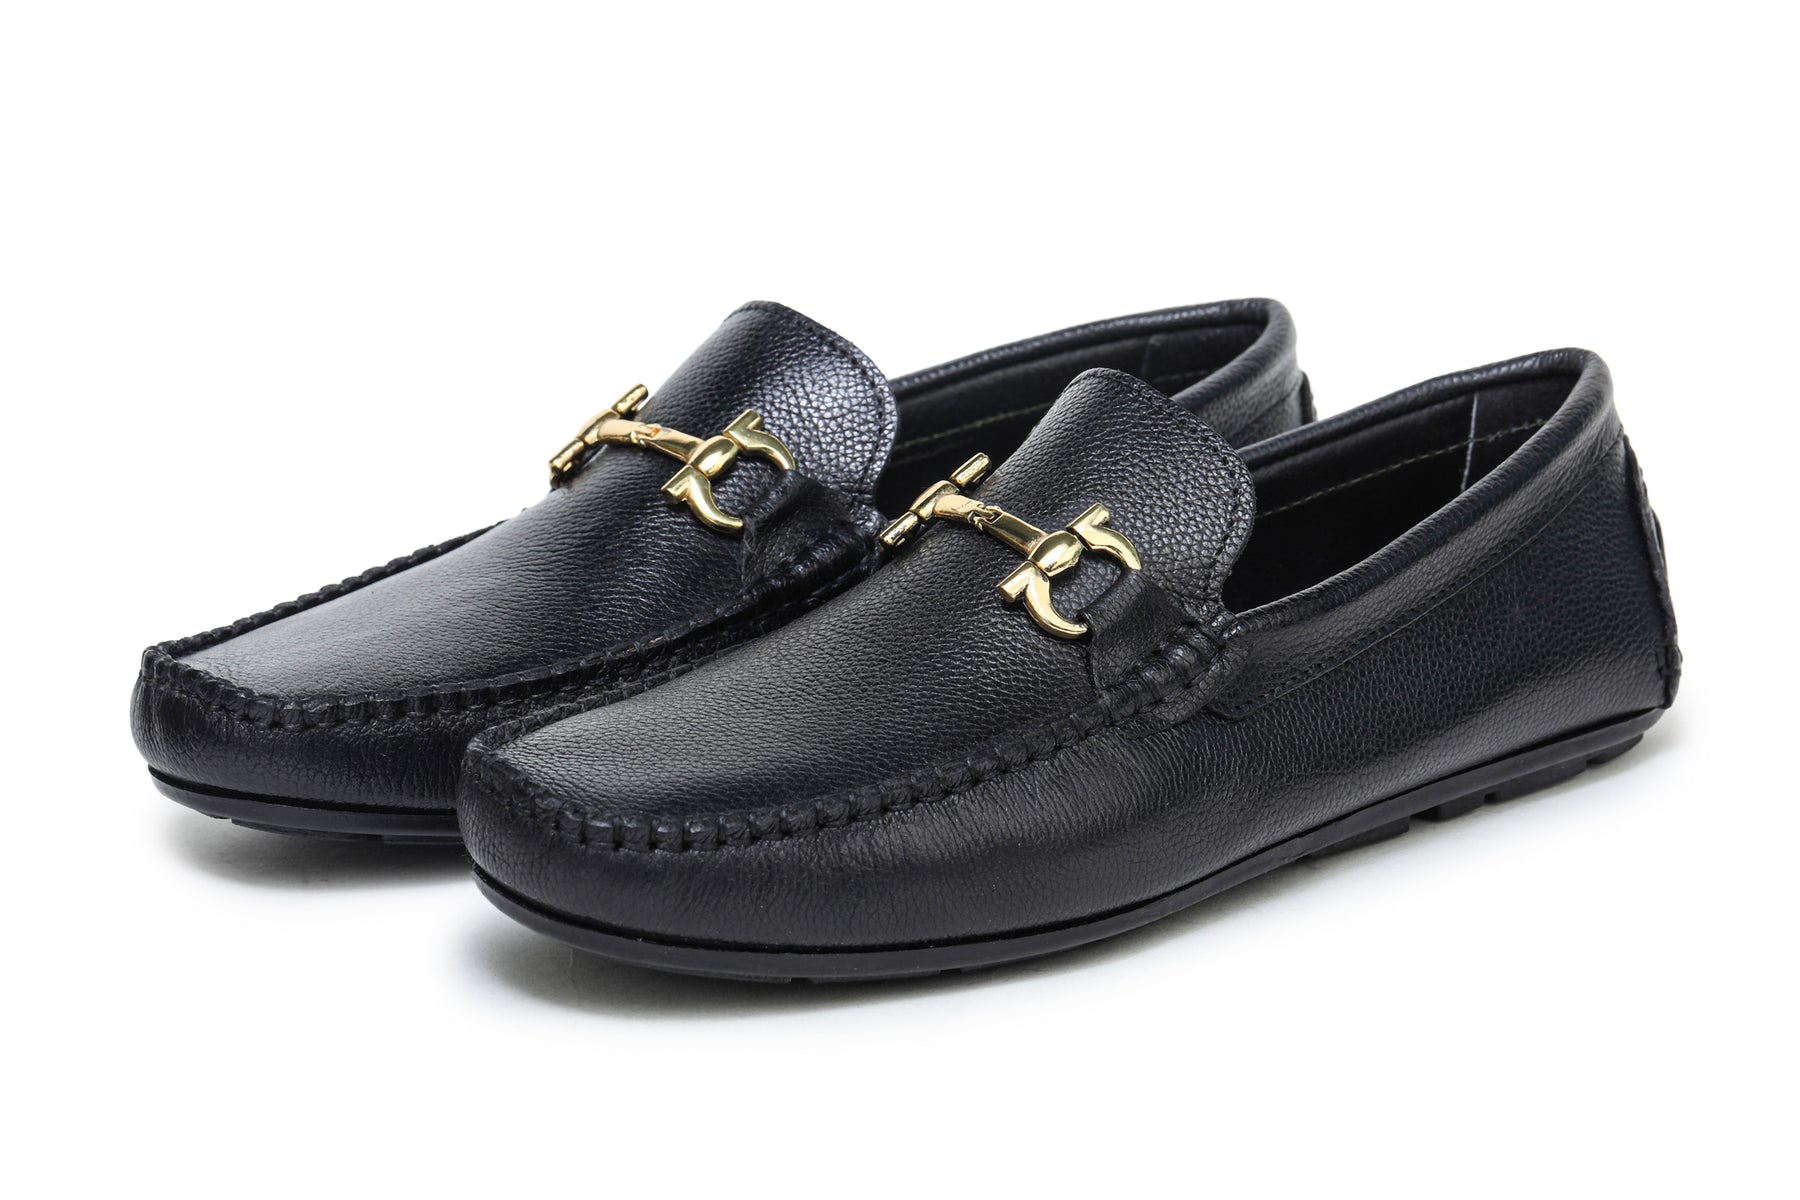 RSC Presents Attractive Most Trendy Party wear, Wedding, Casual Patent  Style Loafers Shoe For Men's, Stylish